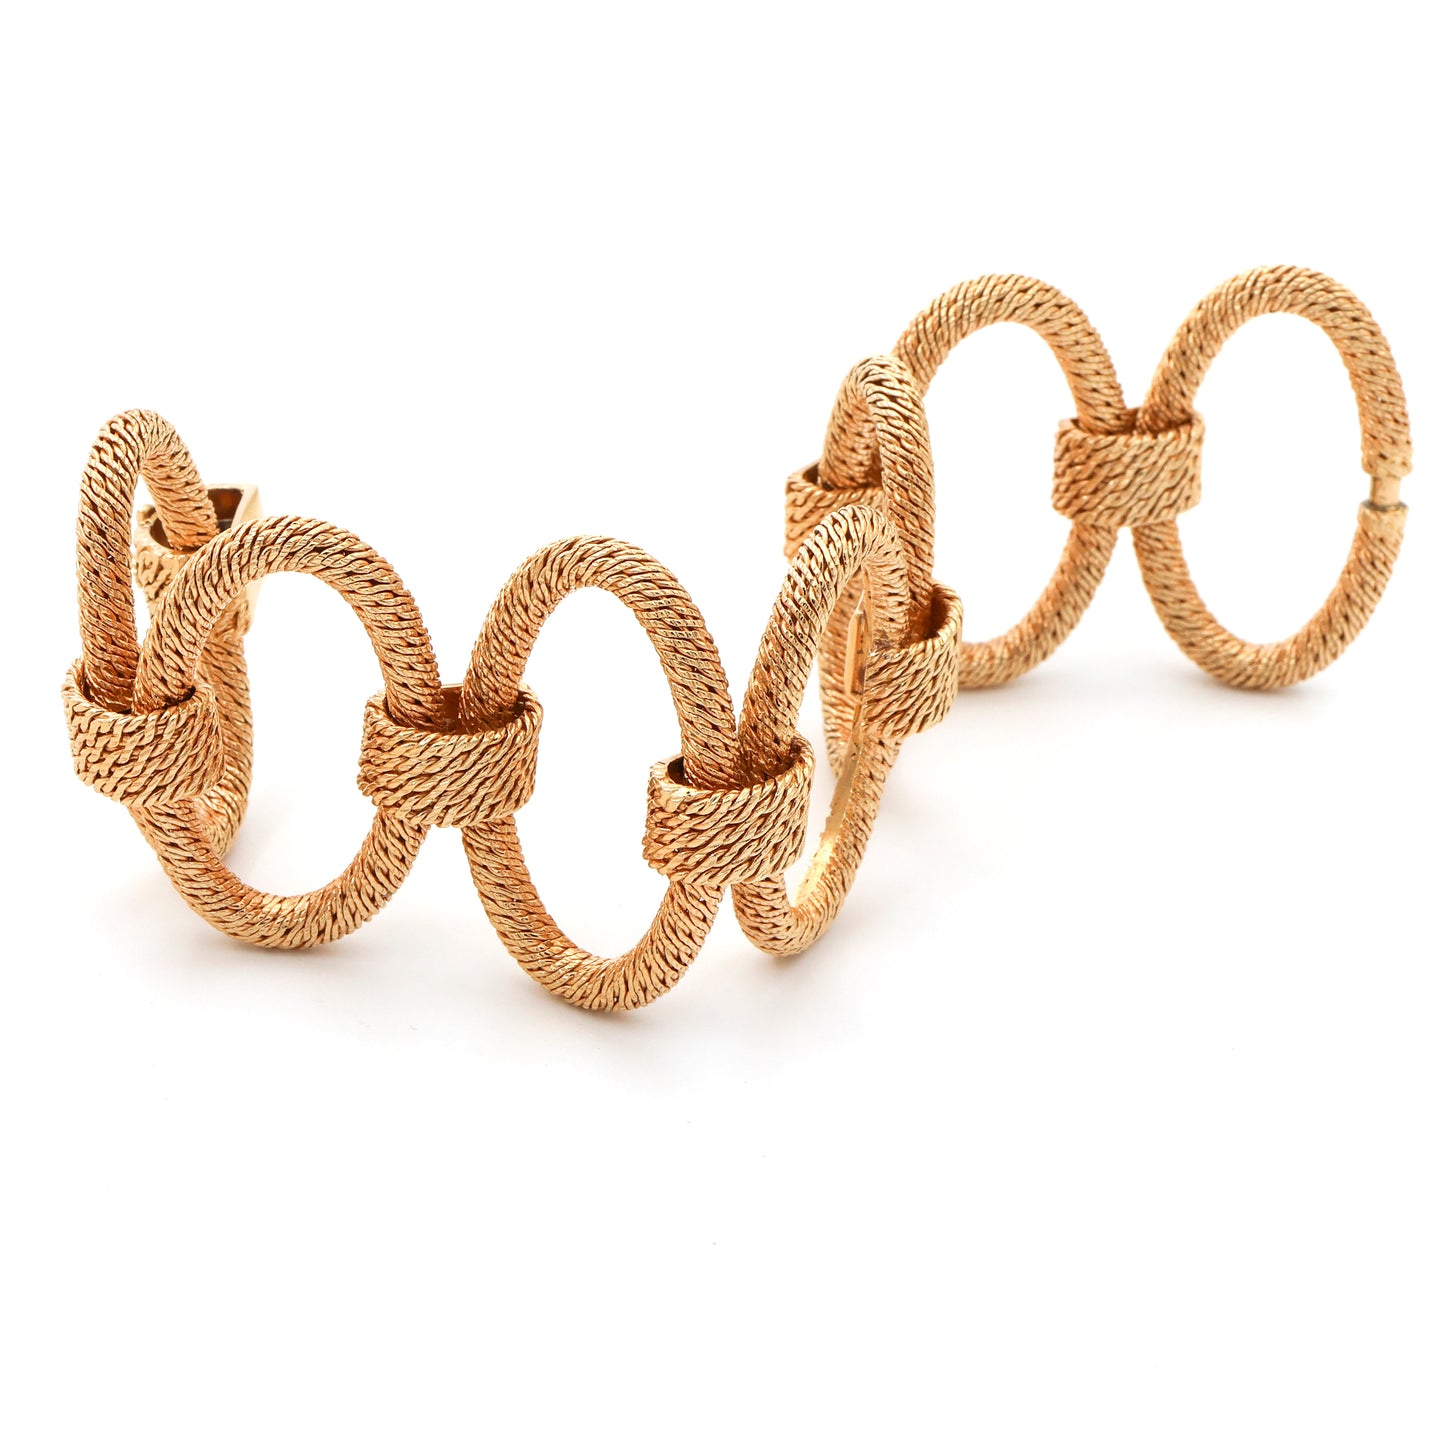 Converted Rolex 18k Yellow Gold Oval Link Bracelet with Twisted Rope Texture